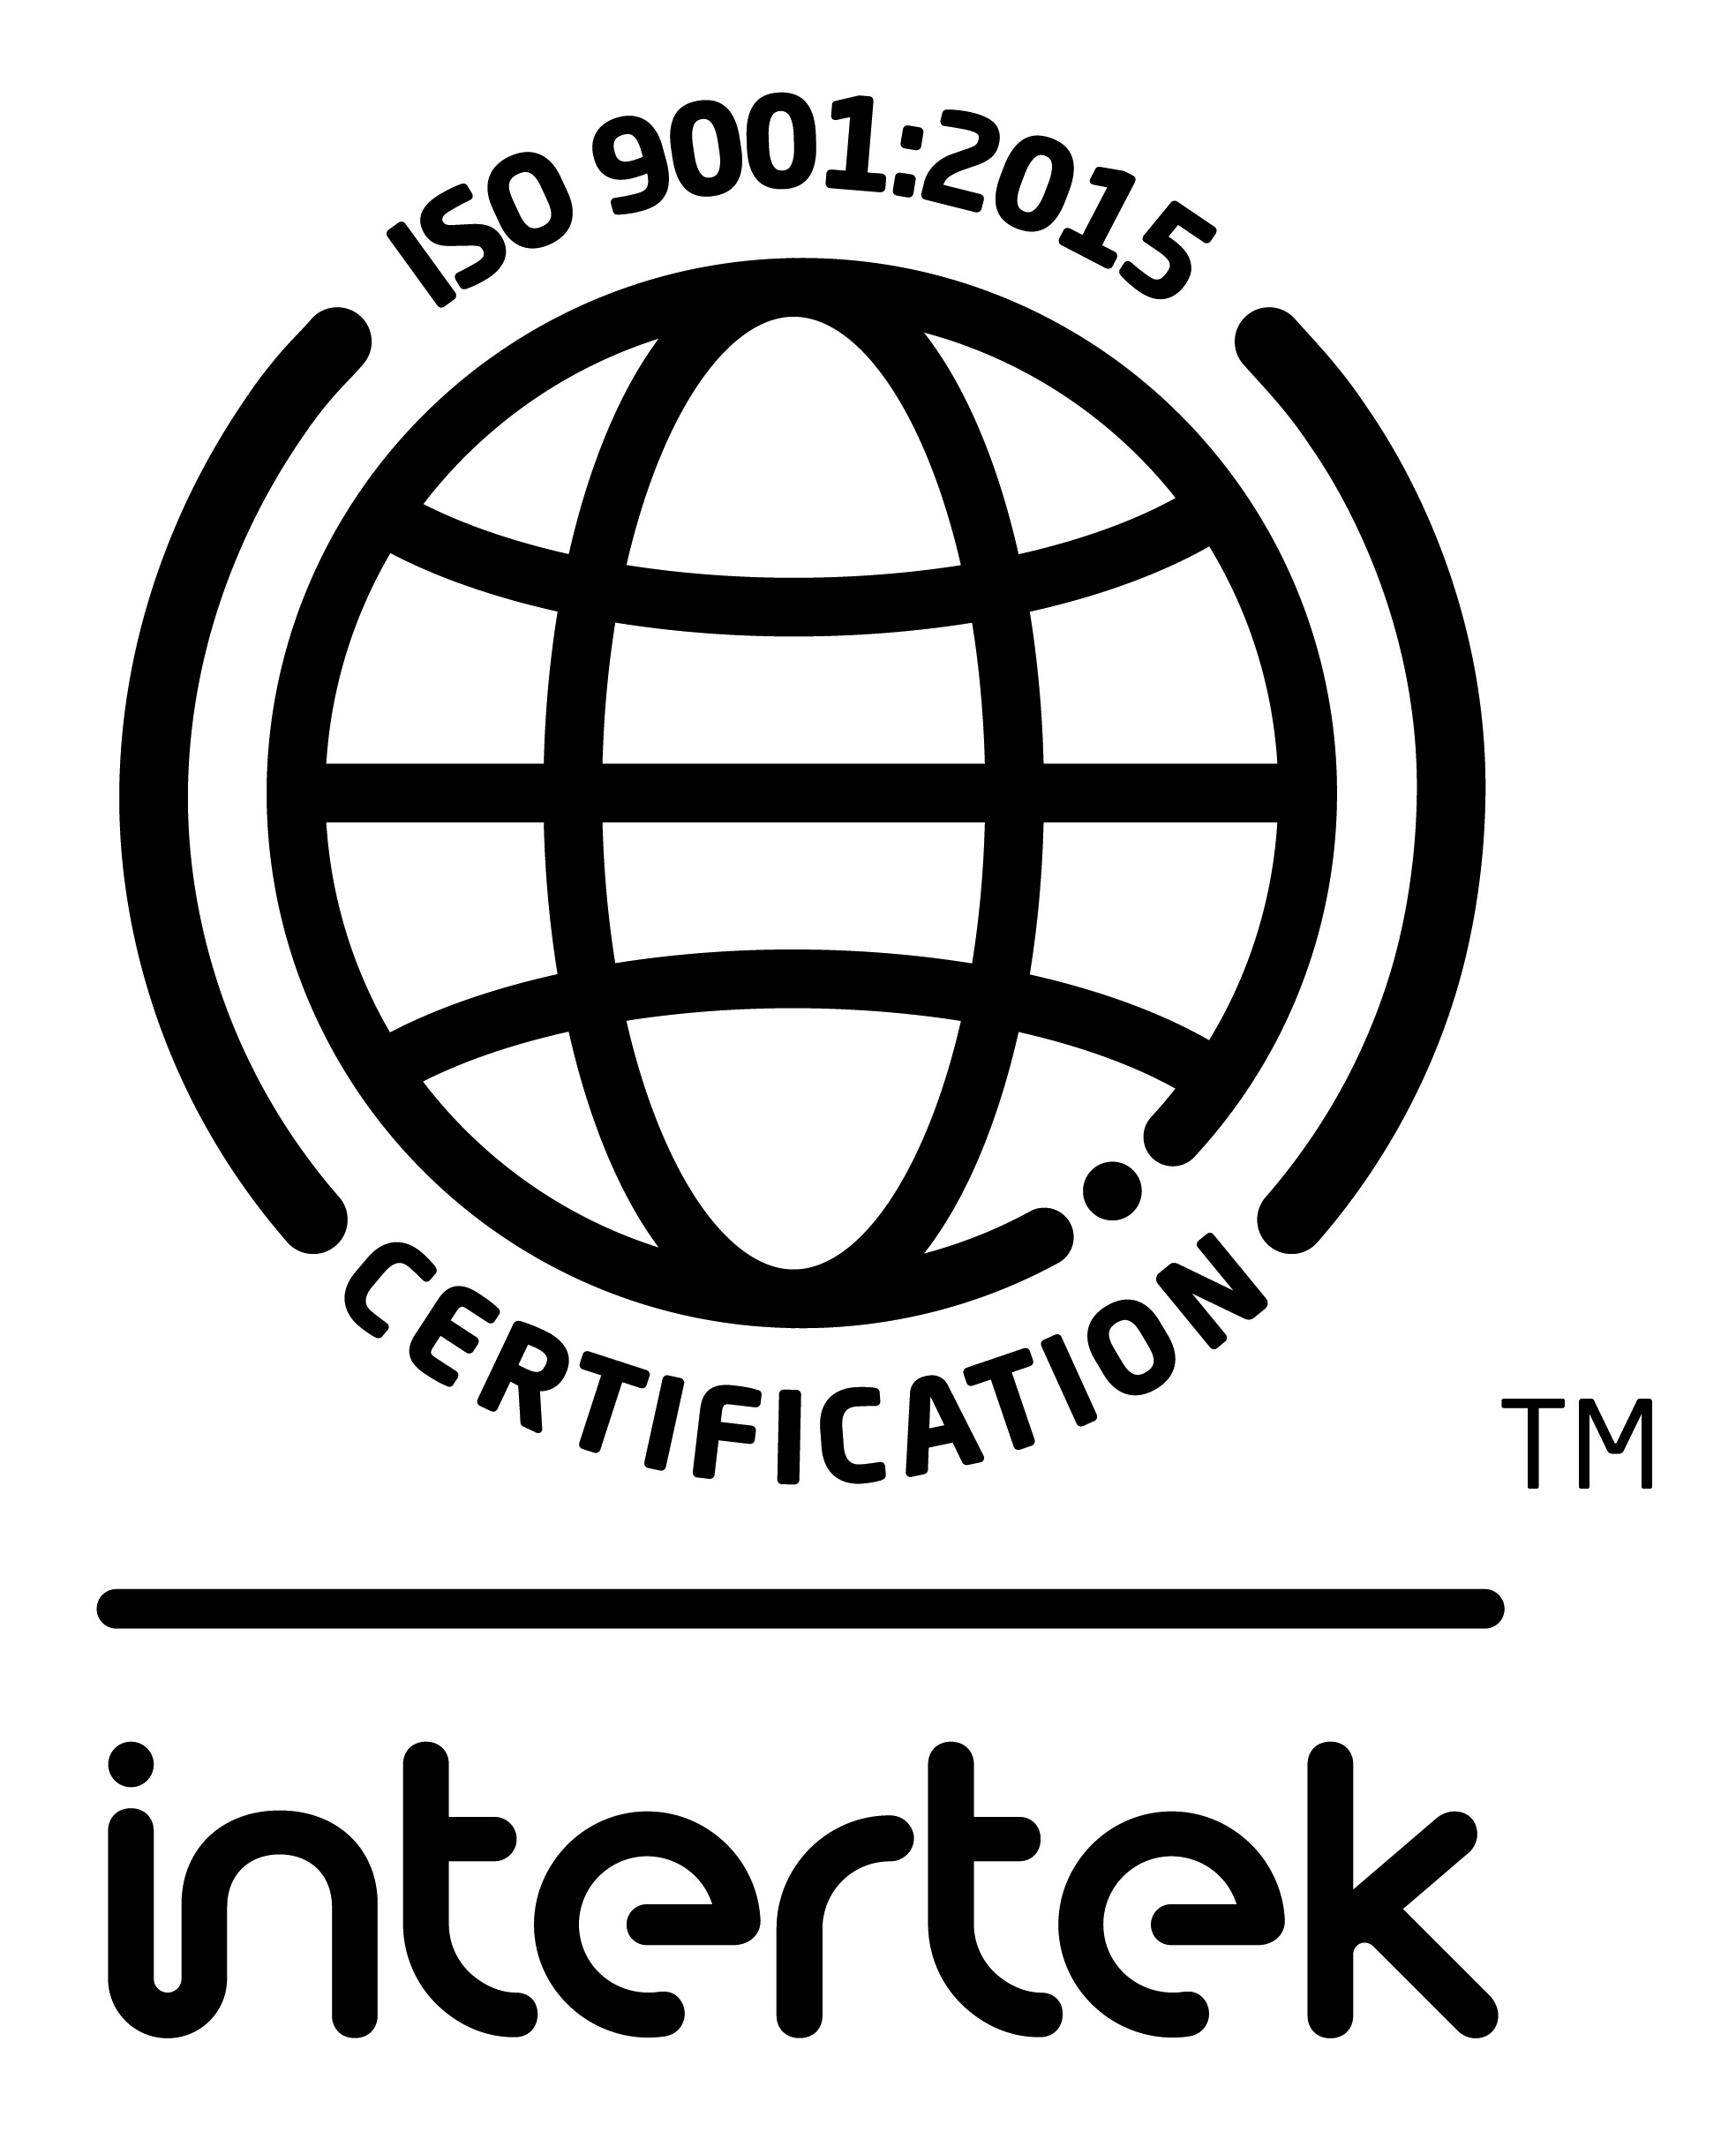 ISO 9001:2015 Certification